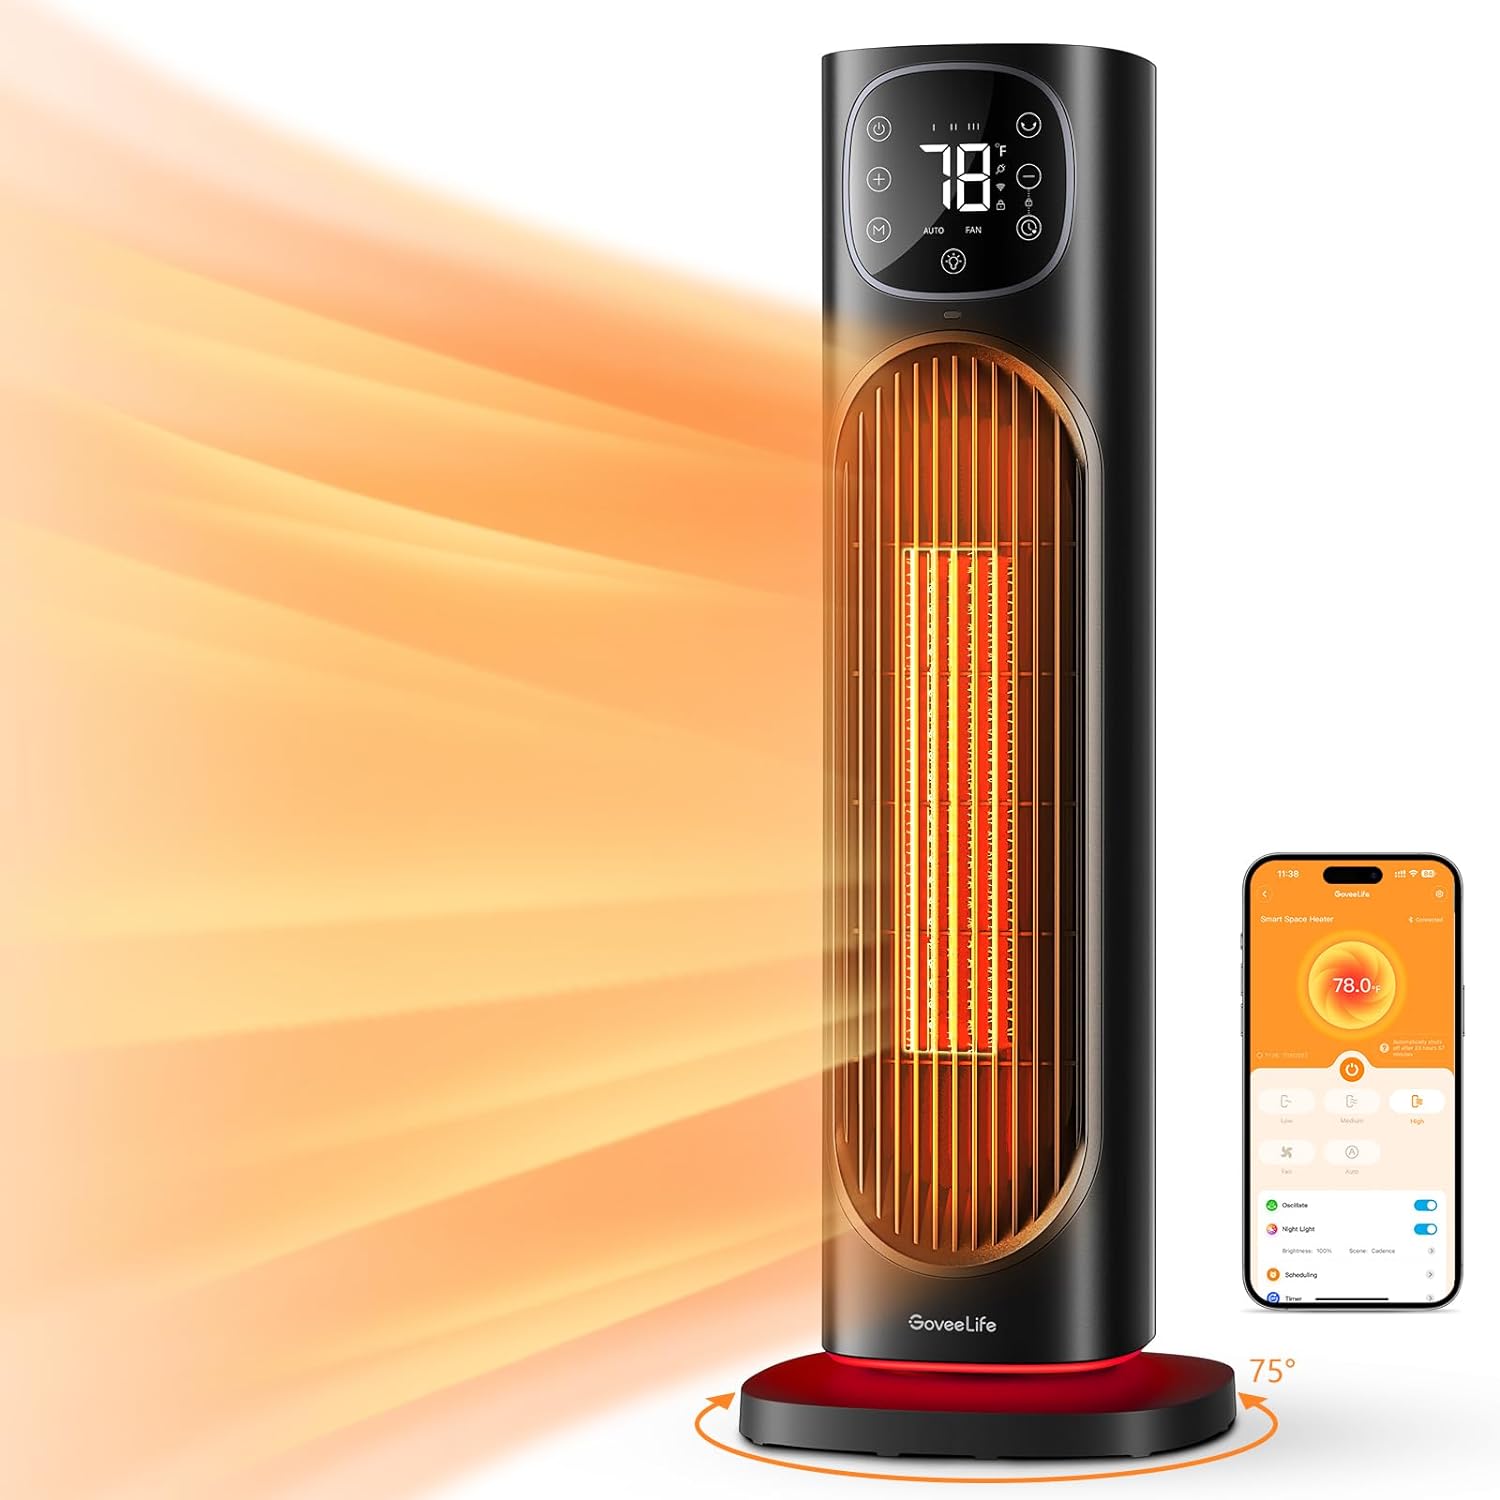 GoveeLife 24 Space Heater, 75° Oscillating Smart Electric Heater with Thermostat, WiFi APP Voice Control, 4 Mode, 24H Timer, Night Light, 1500W Tower Ceramic Heater for Indoor Use, Large Room